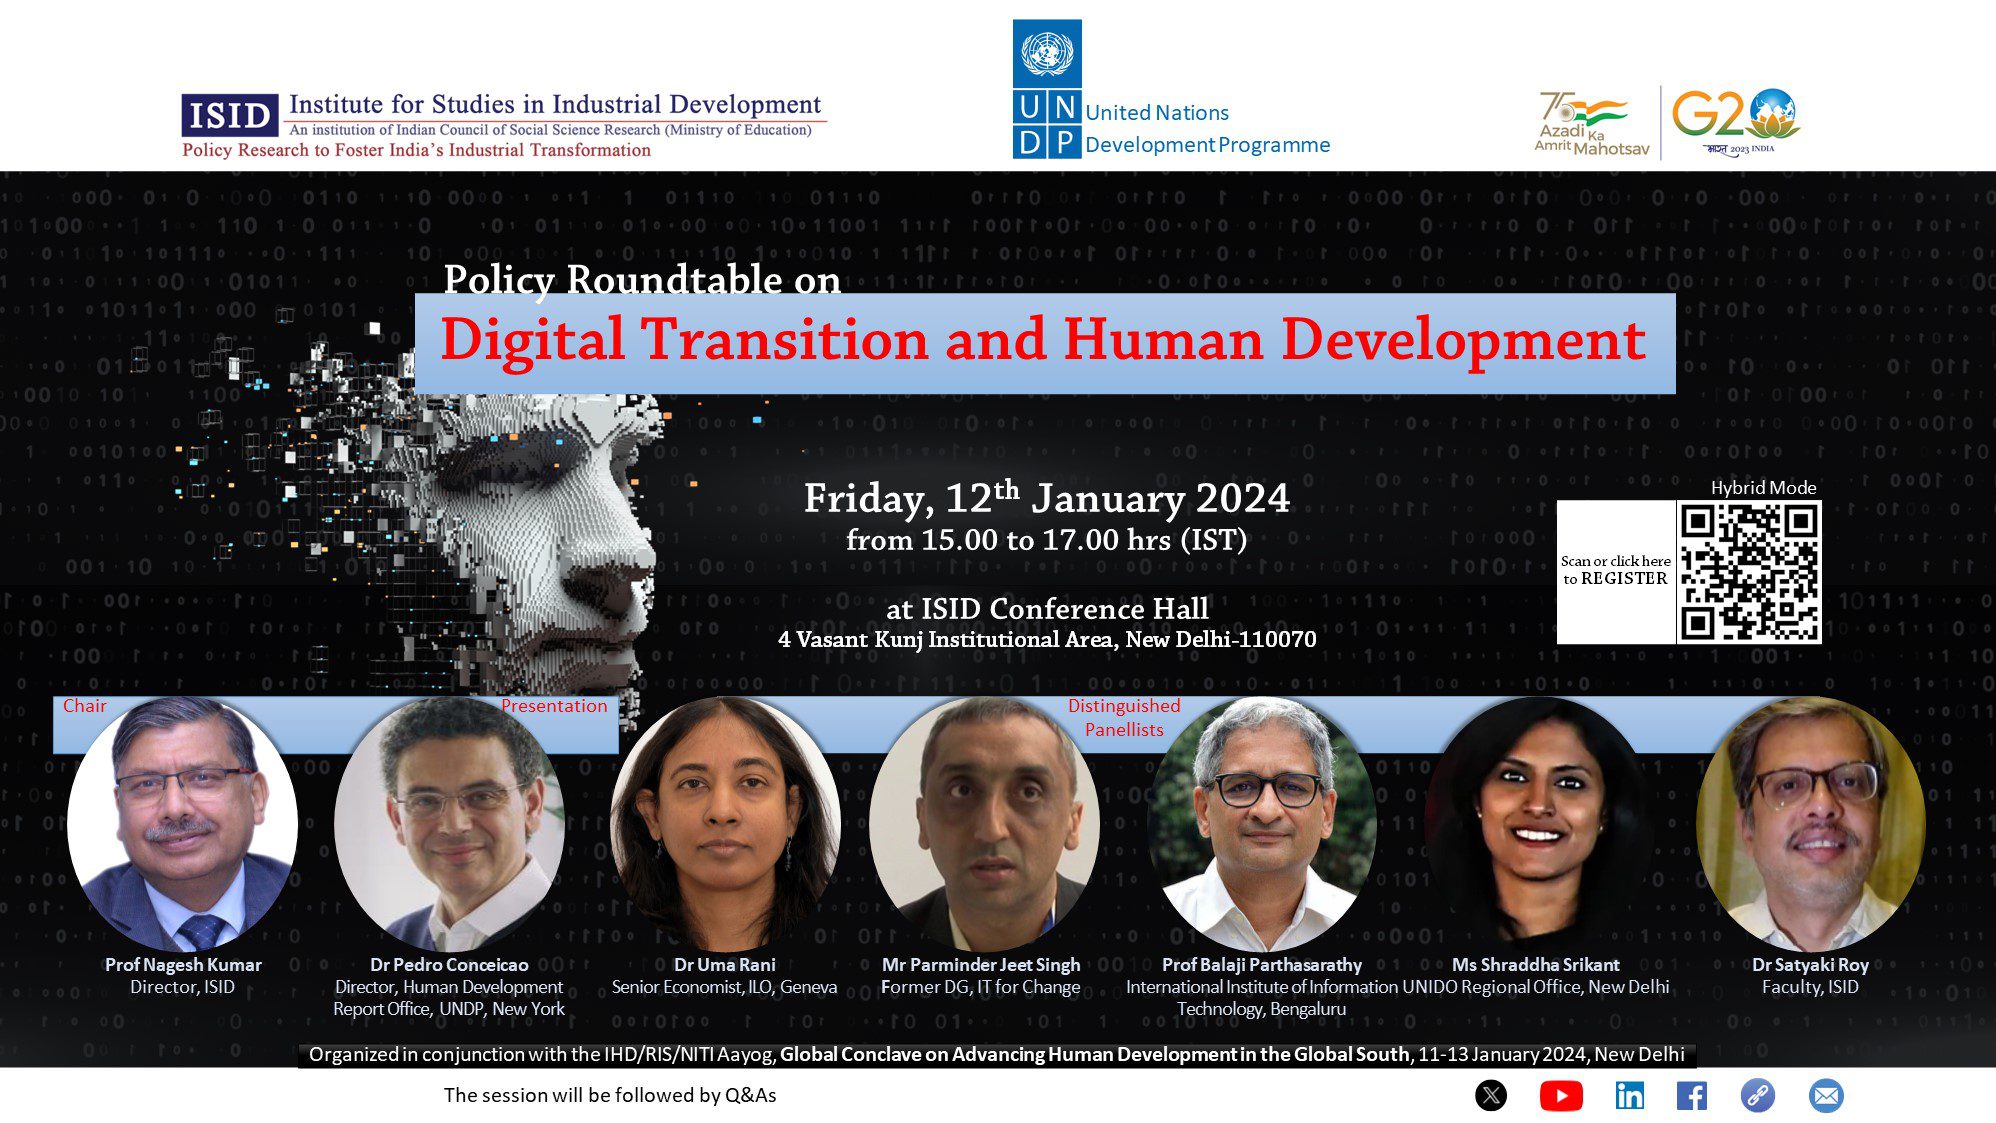 ISID-UNDP Policy Roundtable on Digital Transition & Human Development